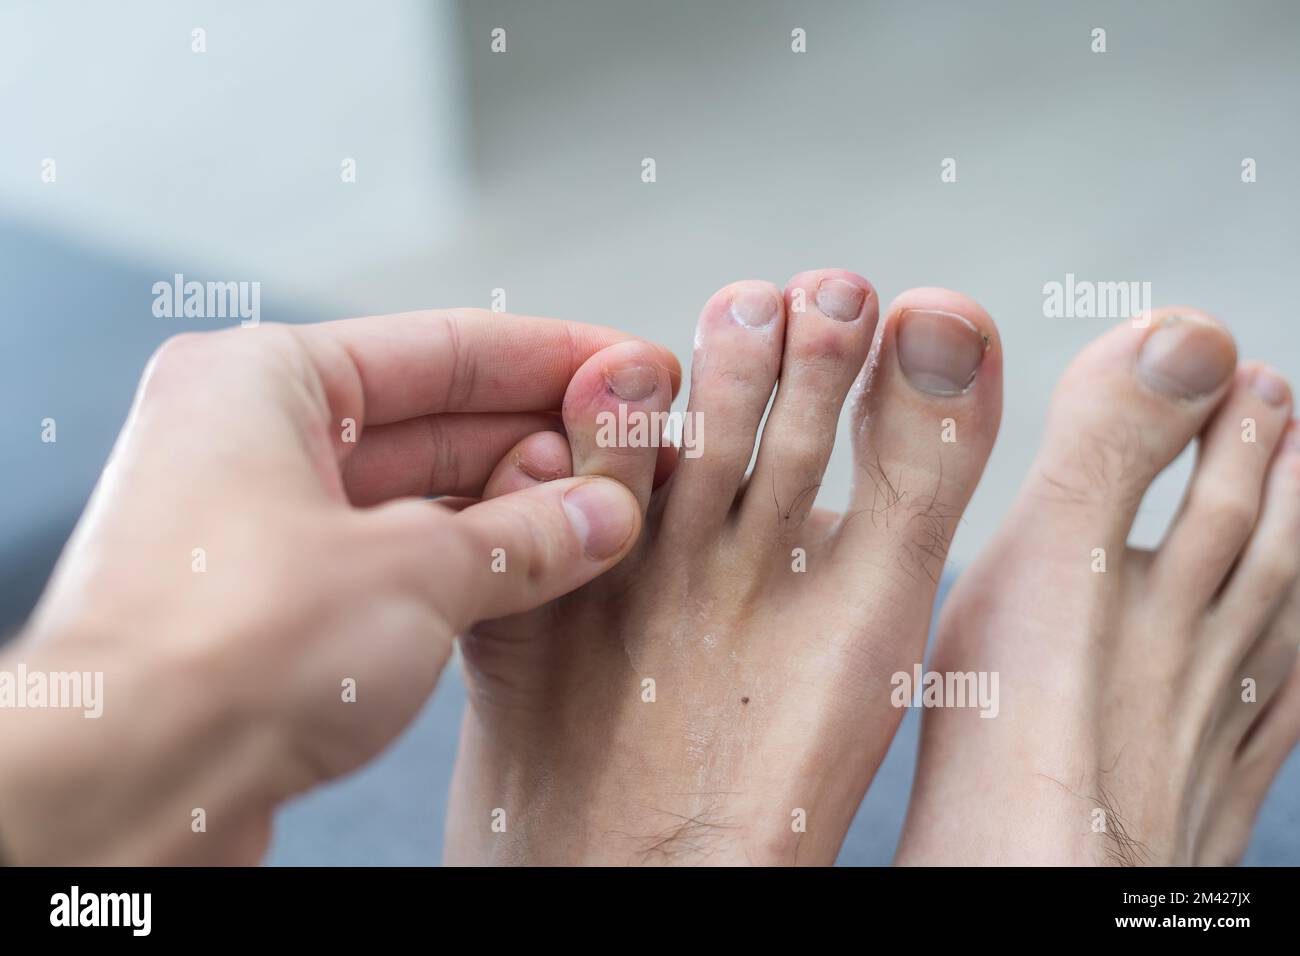 The foot and long nail toes on white concrete background. Long nails and dirty may cause fungal. Stock Photo